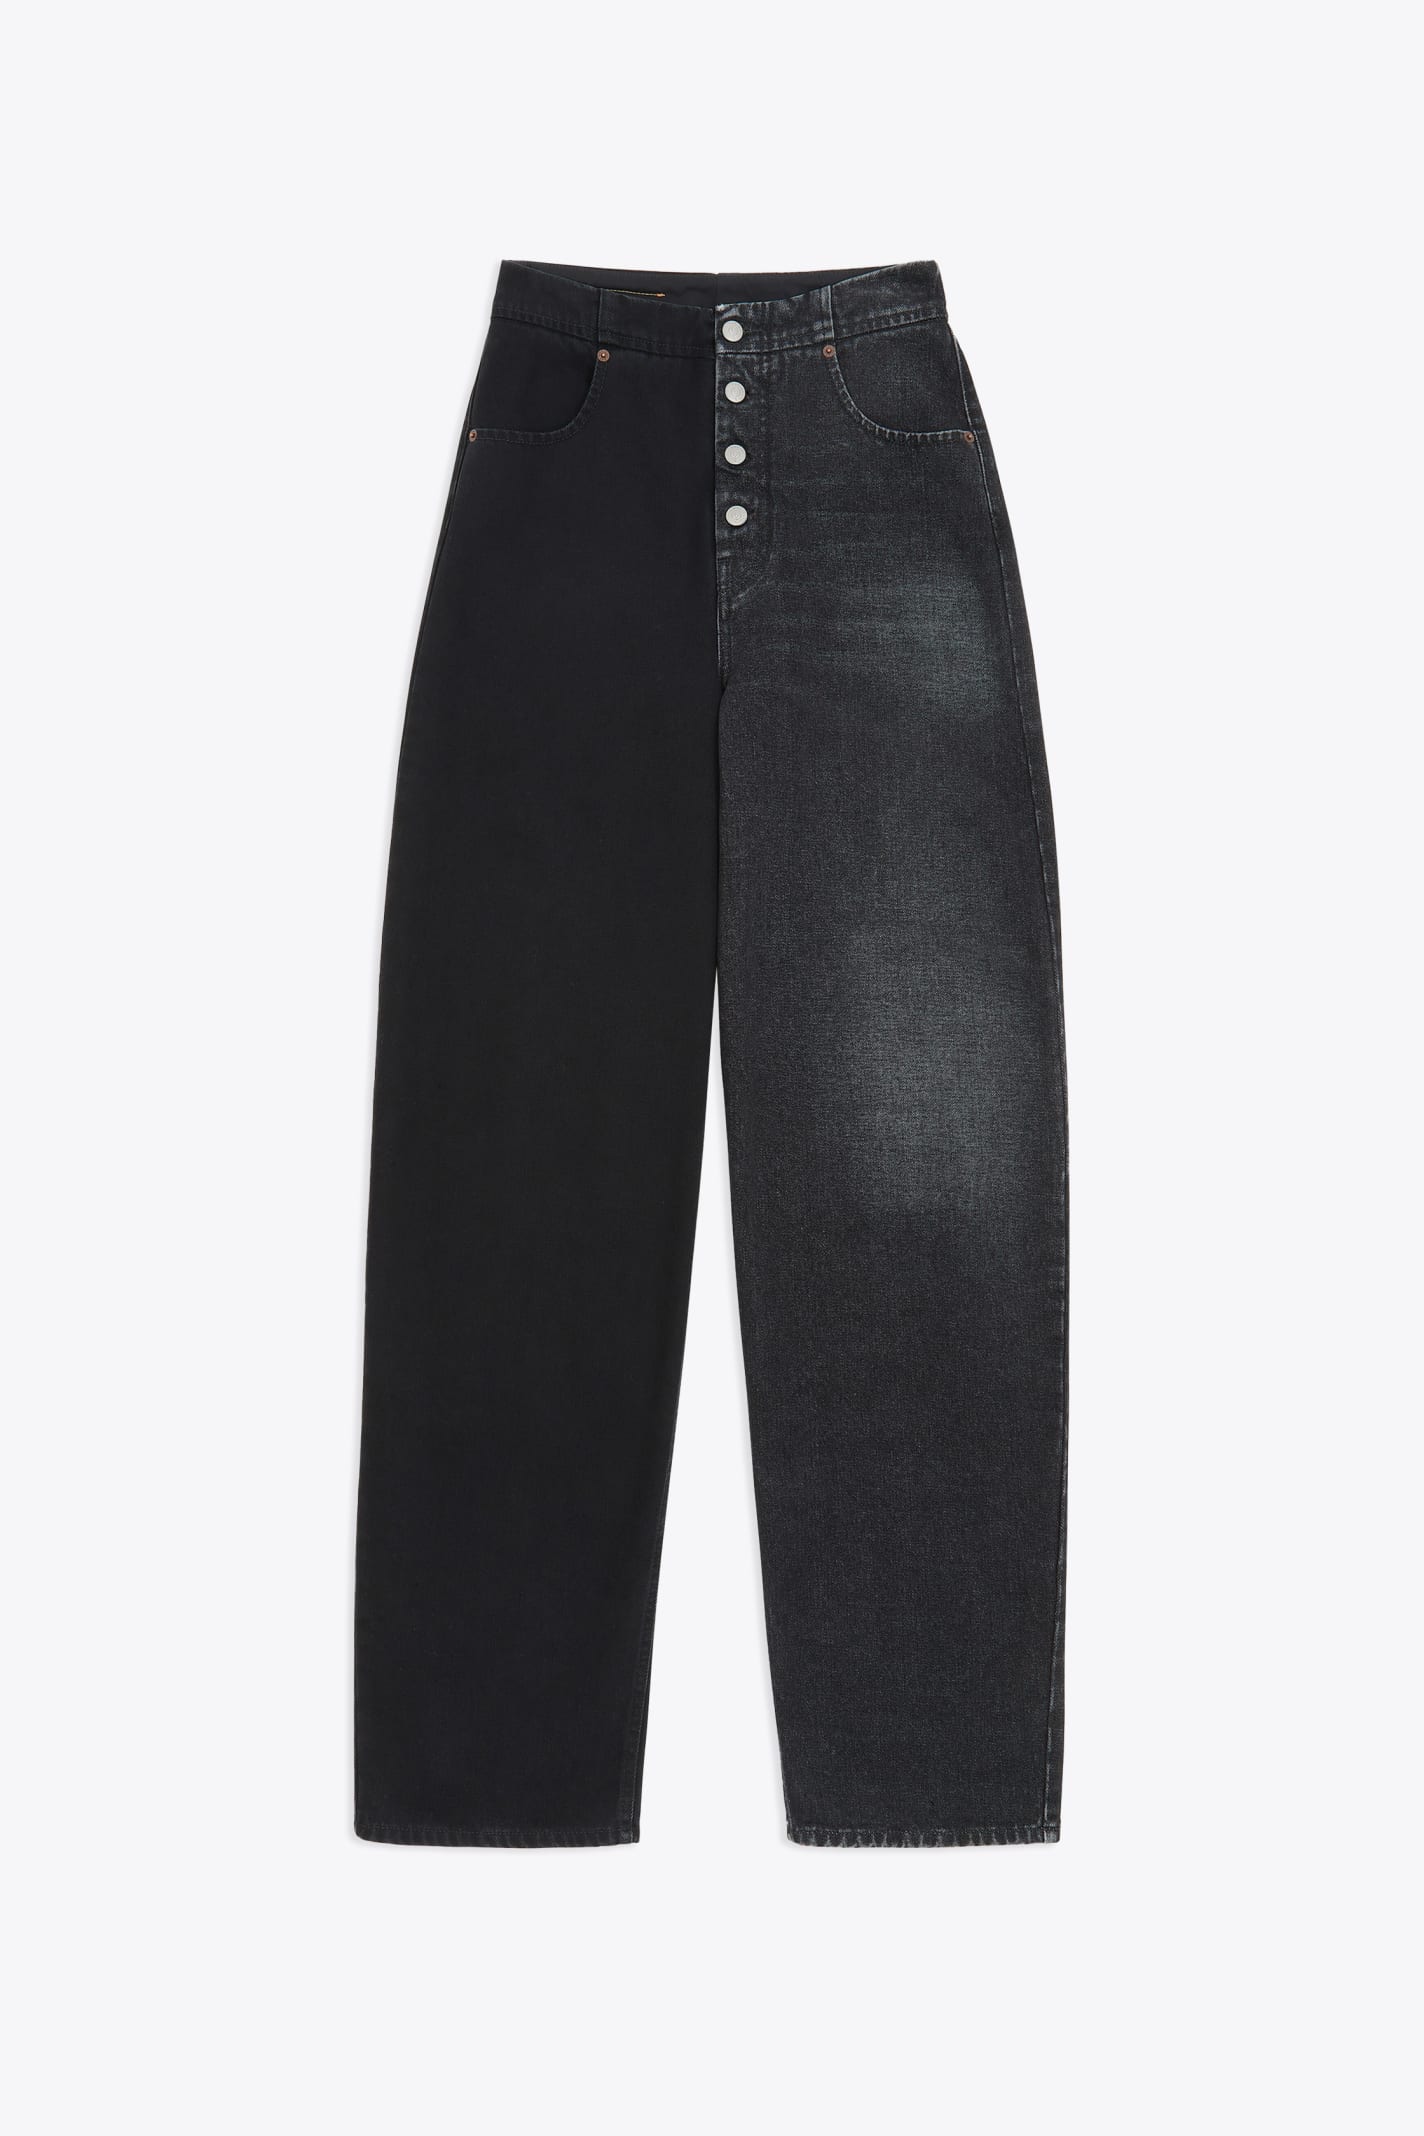 Shop Mm6 Maison Margiela Pantalone 5 Tasche Black And Grey Half And Half Baggy Fit Jeans In Black/grey